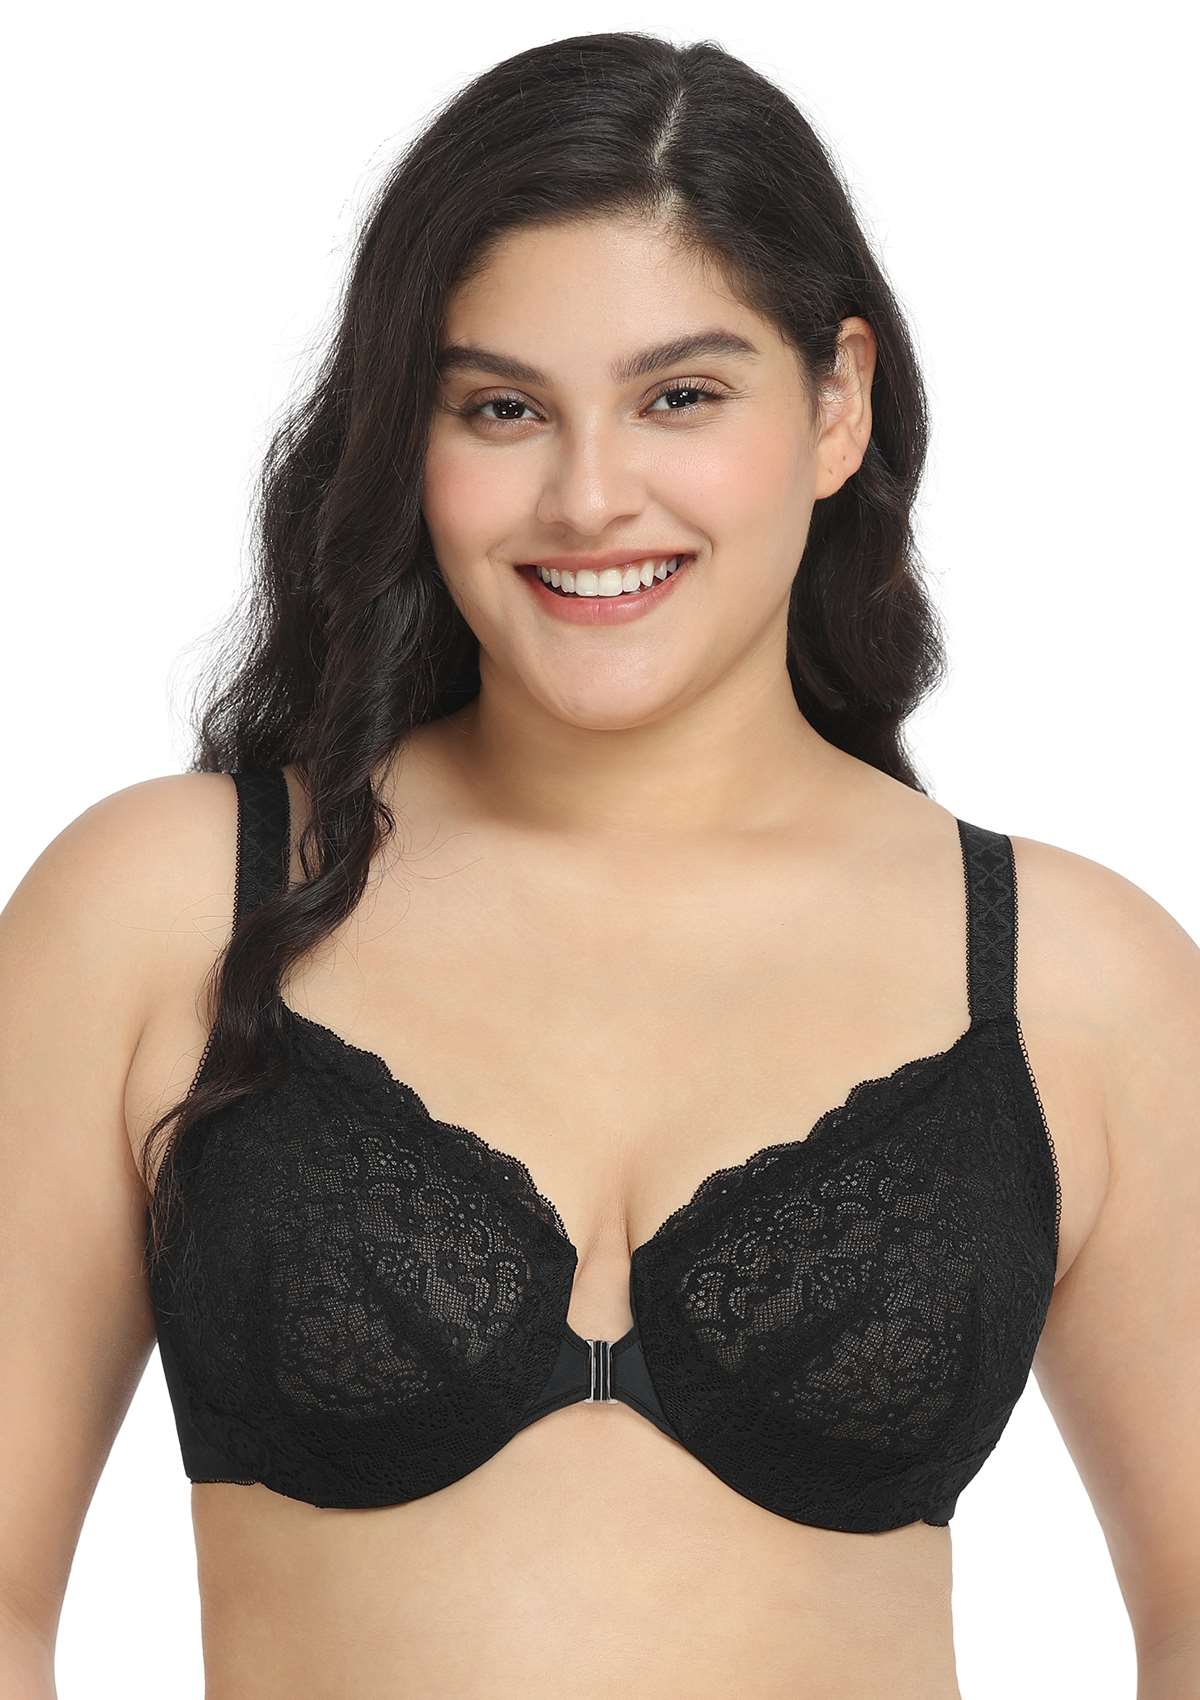 HSIA Nymphaea Front-Close Unlined Retro Floral Lace Back Smoothing Bra - Black / 36 / I